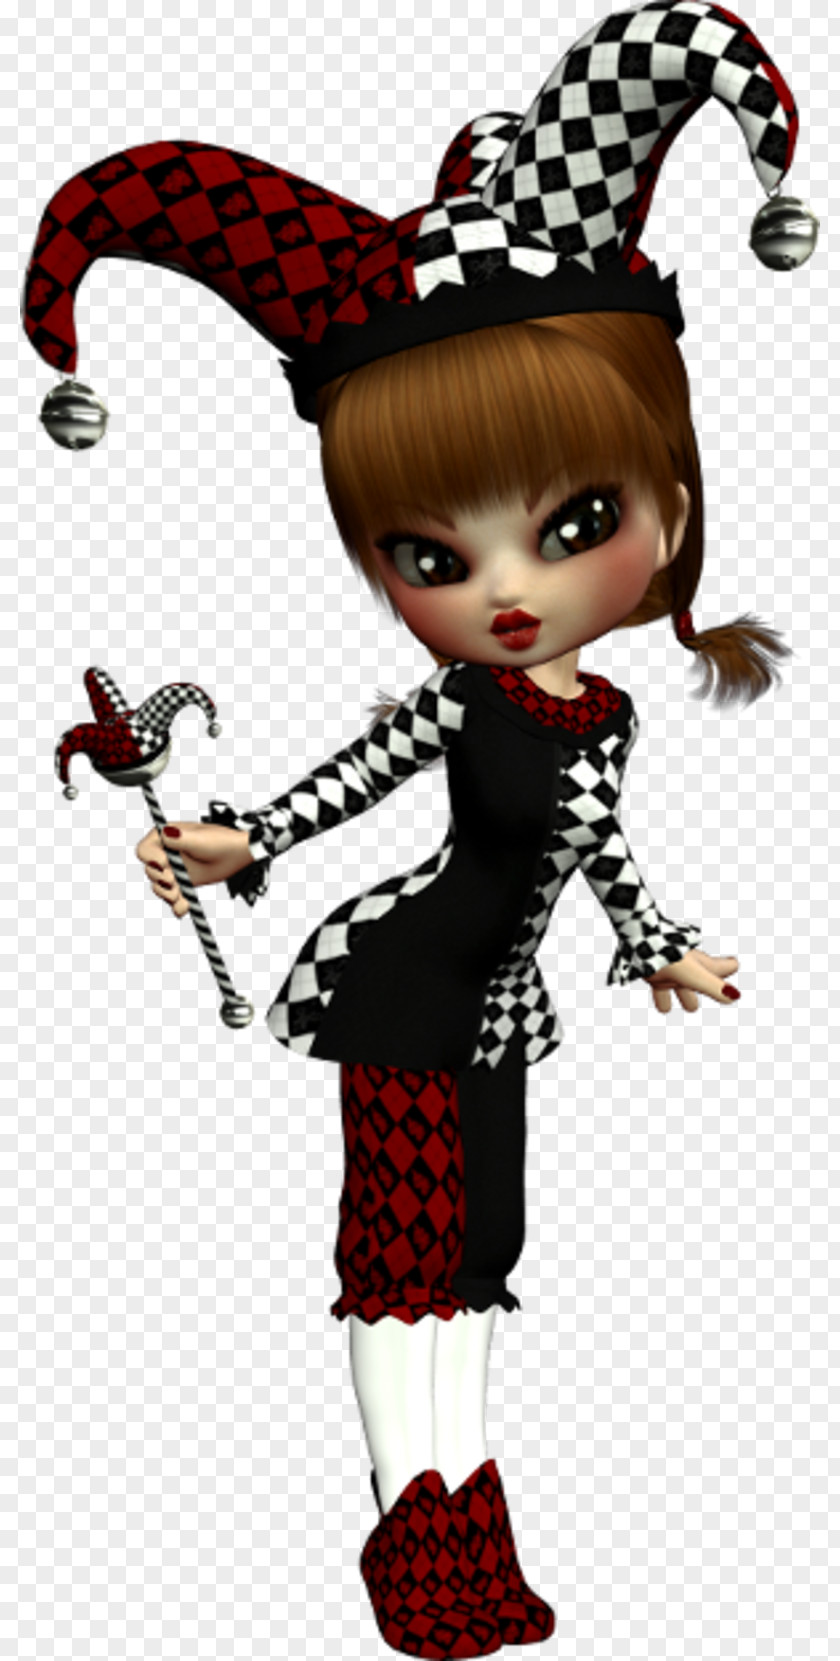 Doll The Harlequin's Carnival Puss In Boots Character PNG